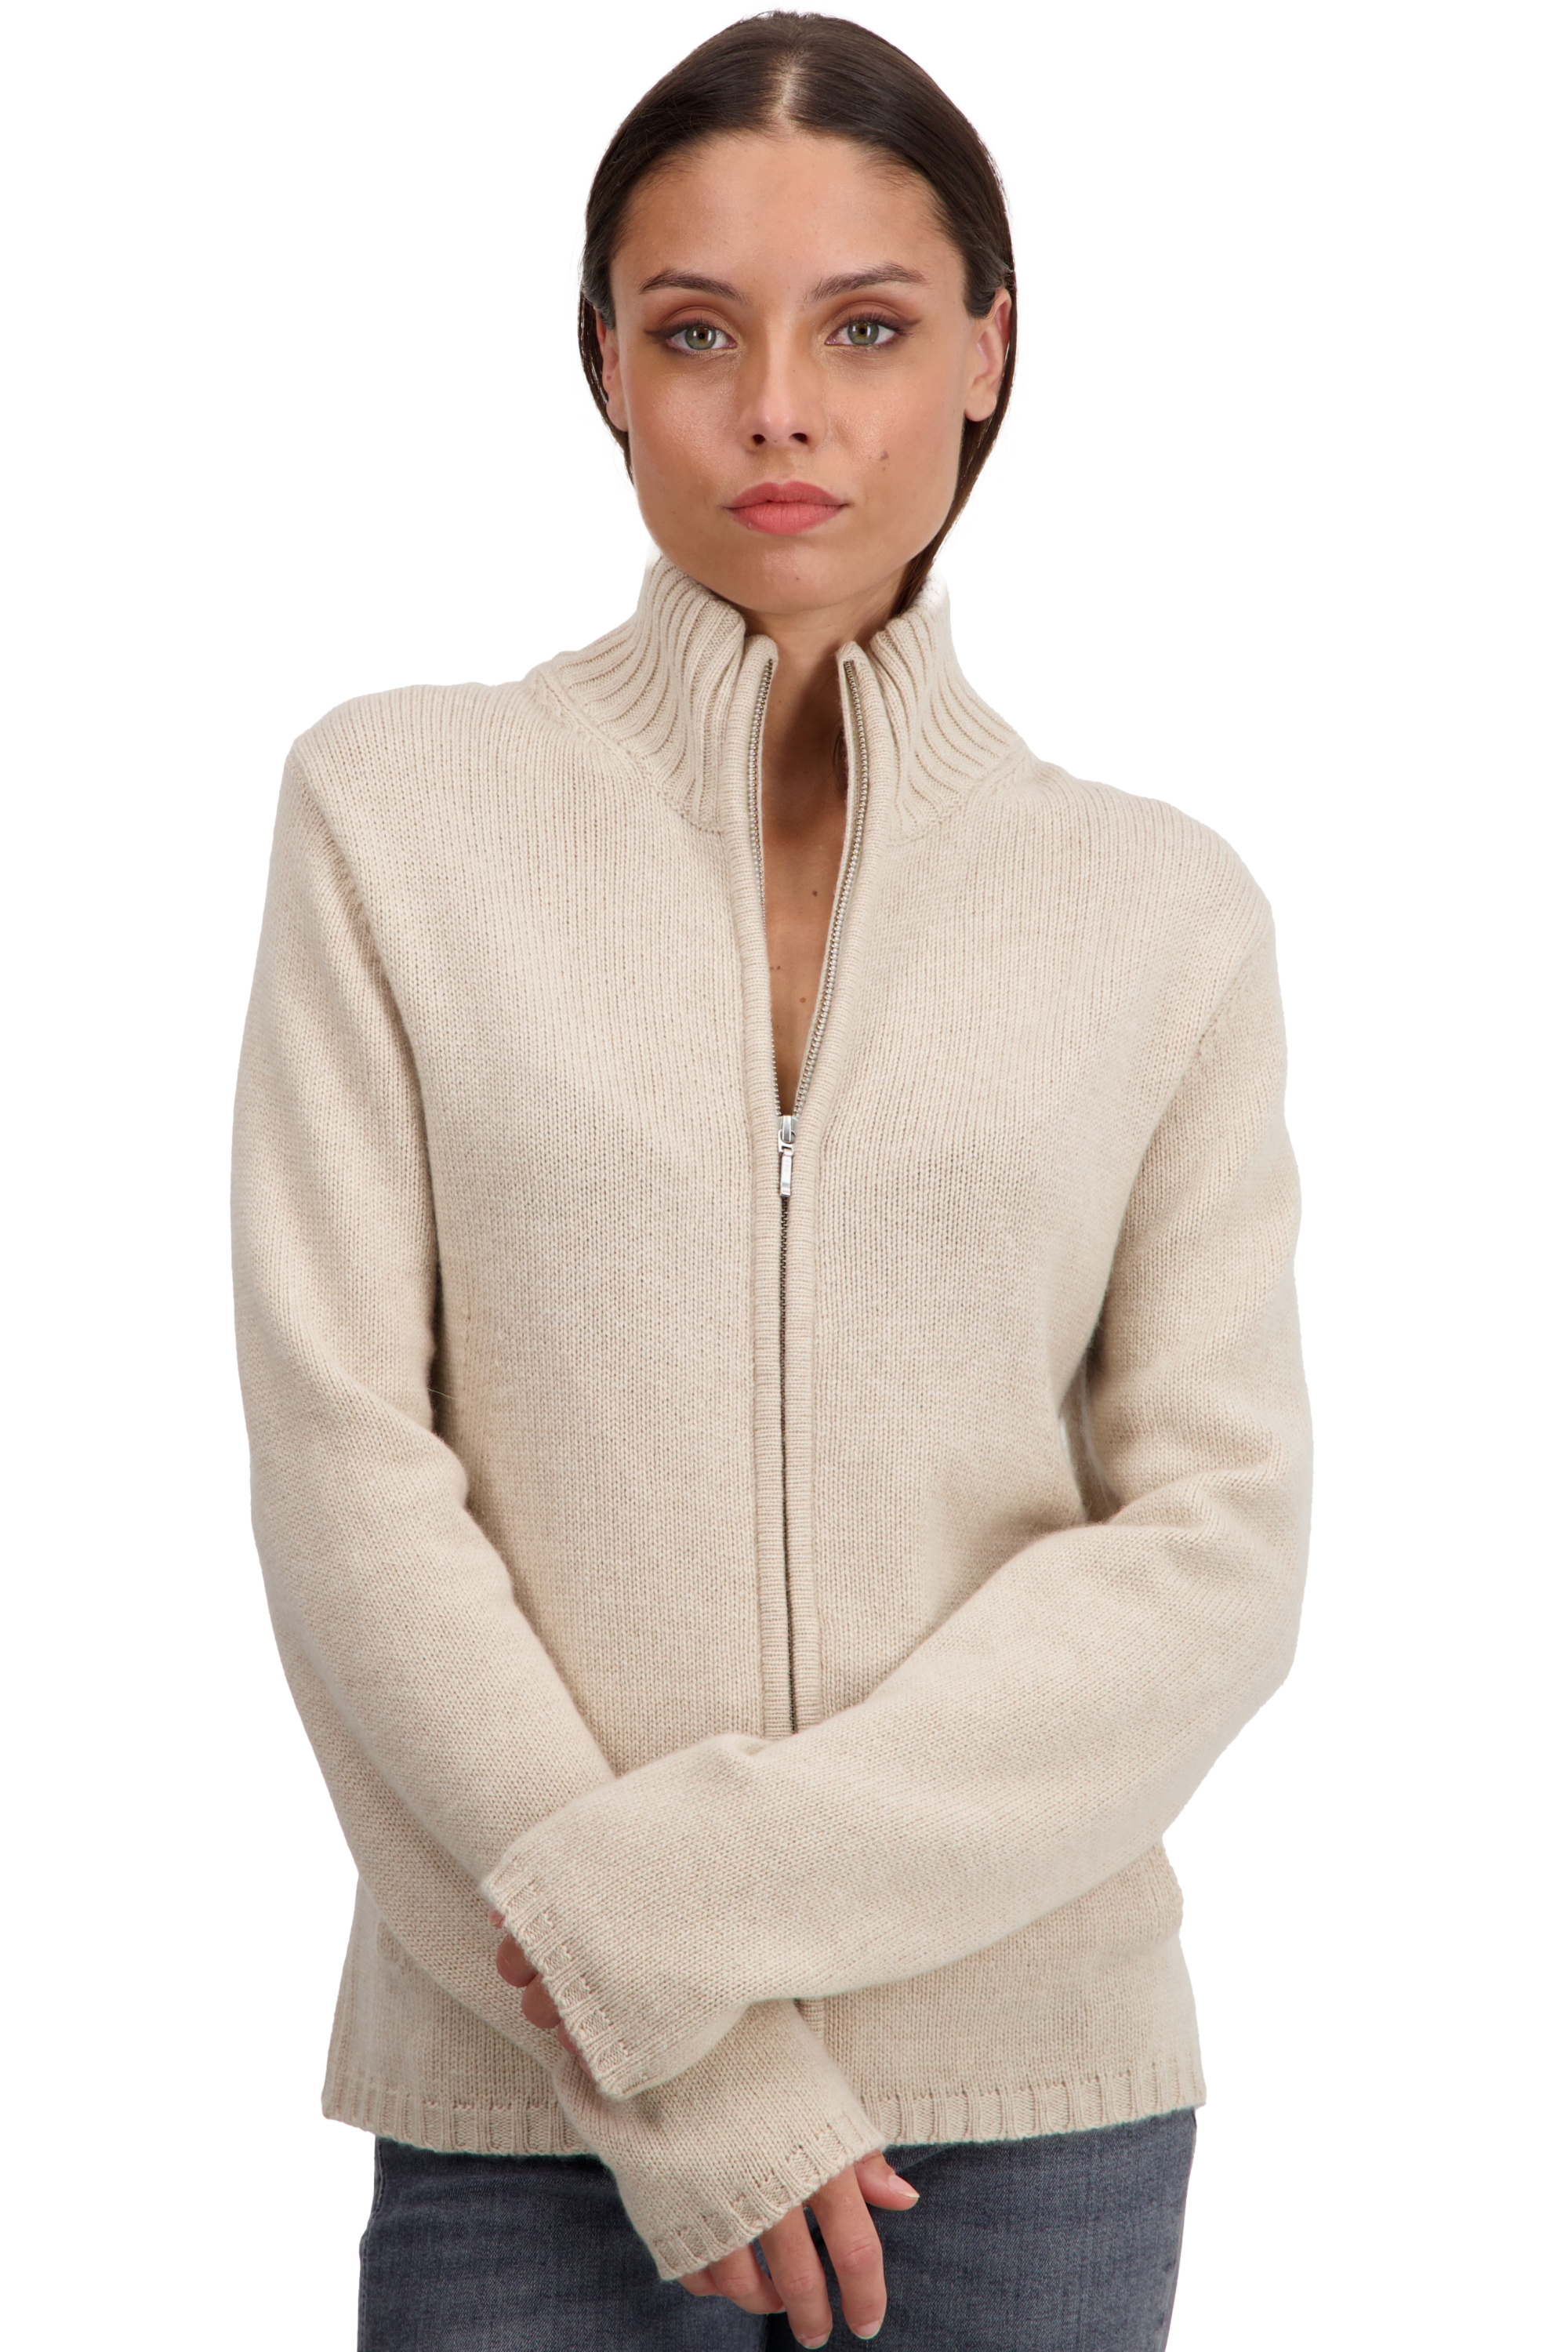 Cashmere ladies timeless classics elodie natural beige 3xl